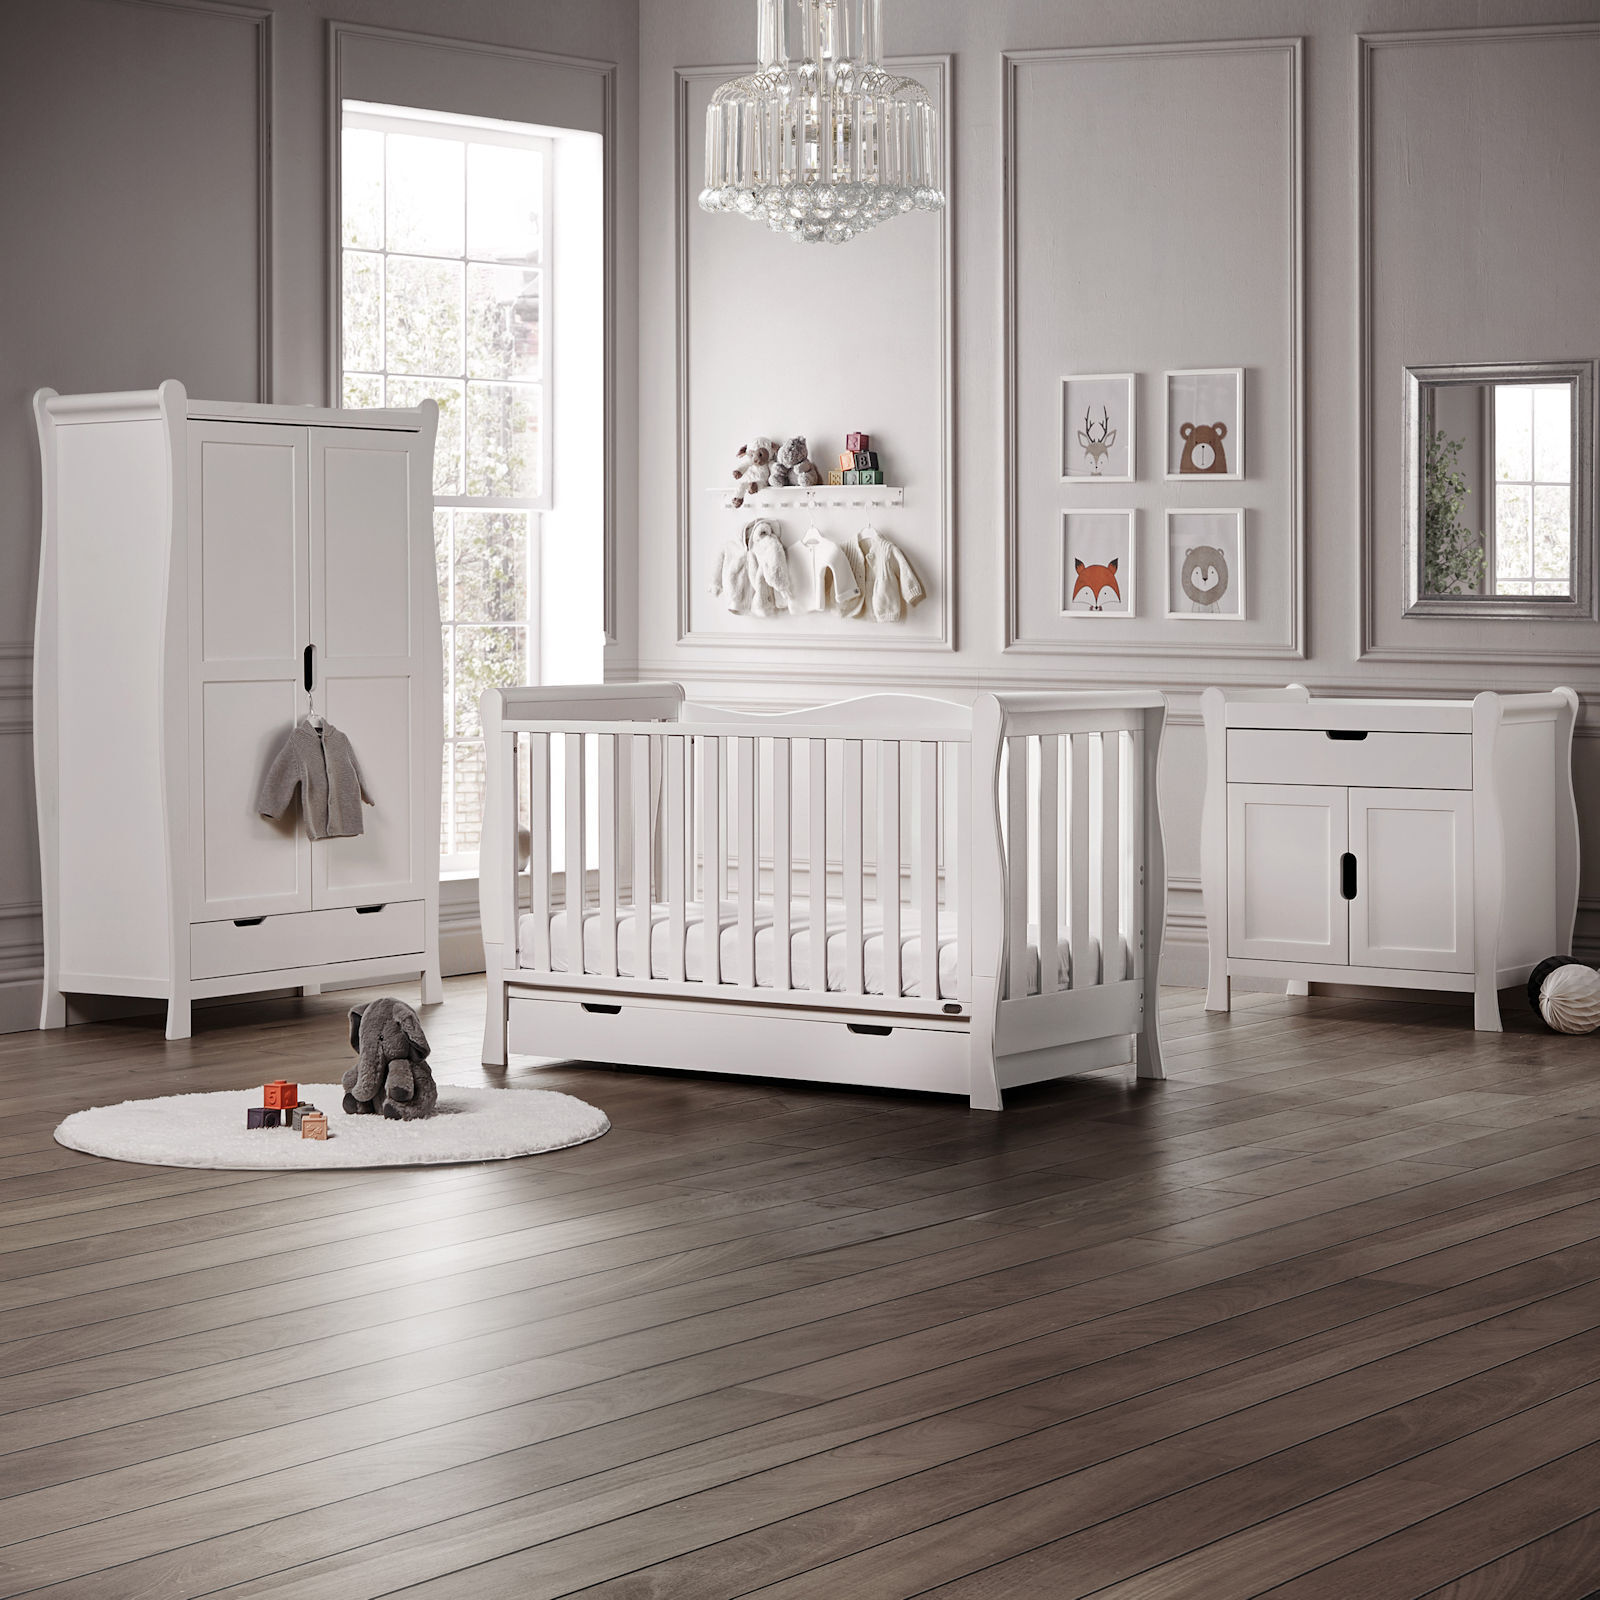 Puggle Prestbury Slatted Luxe Deluxe Sleigh 5pc Nursery Furniture Set with Drawer - White